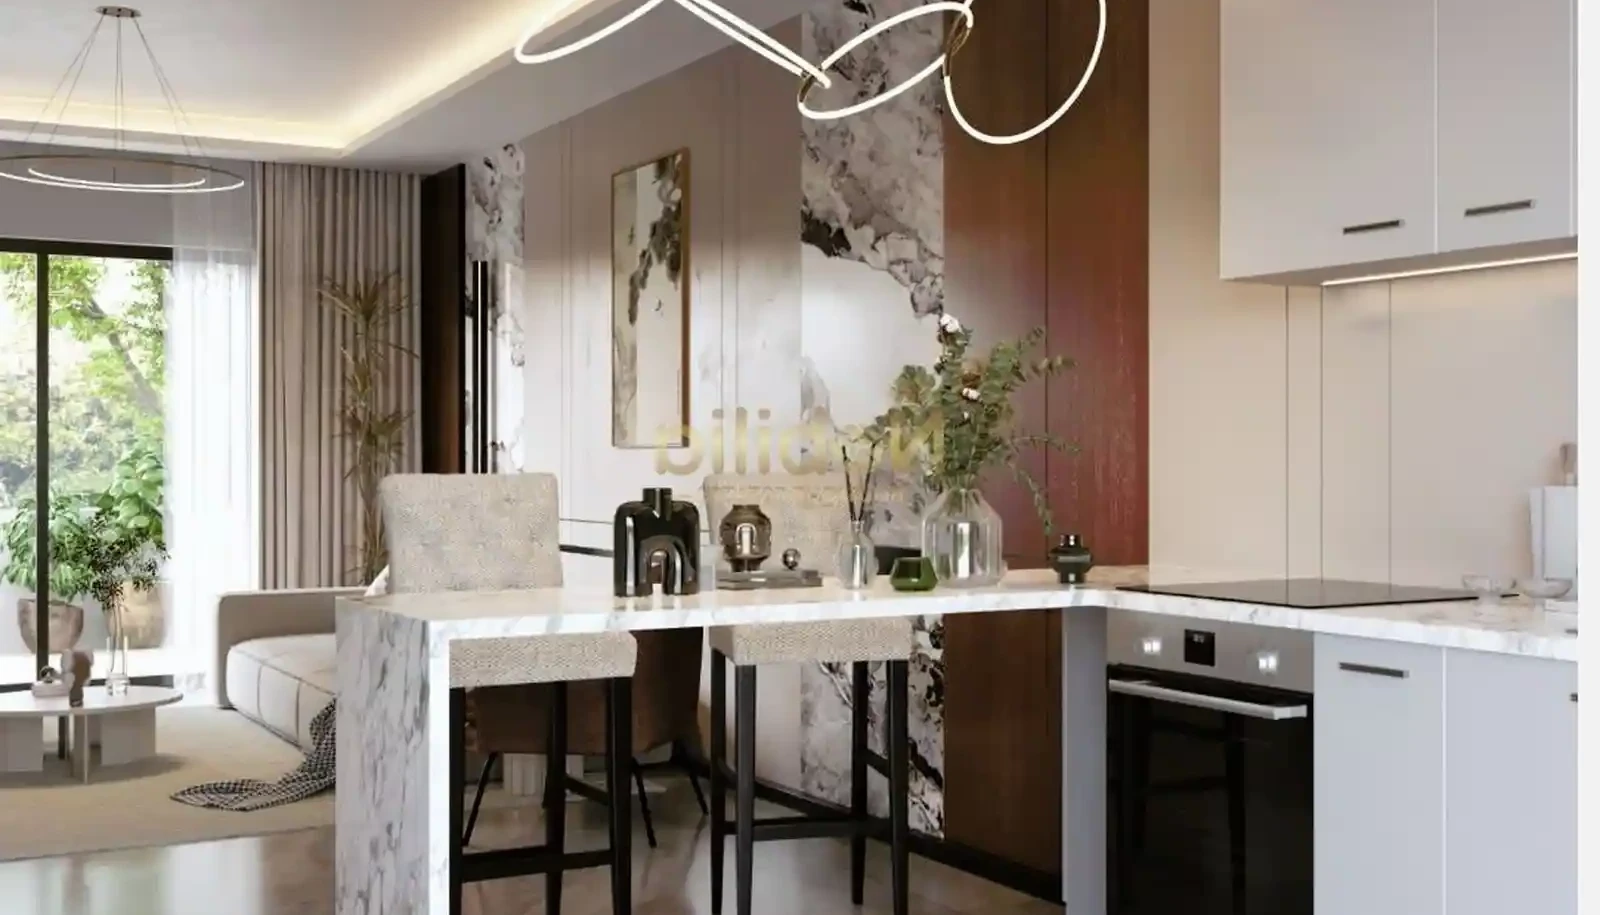 2-bedroom apartment fоr sаle €379.000, image 1